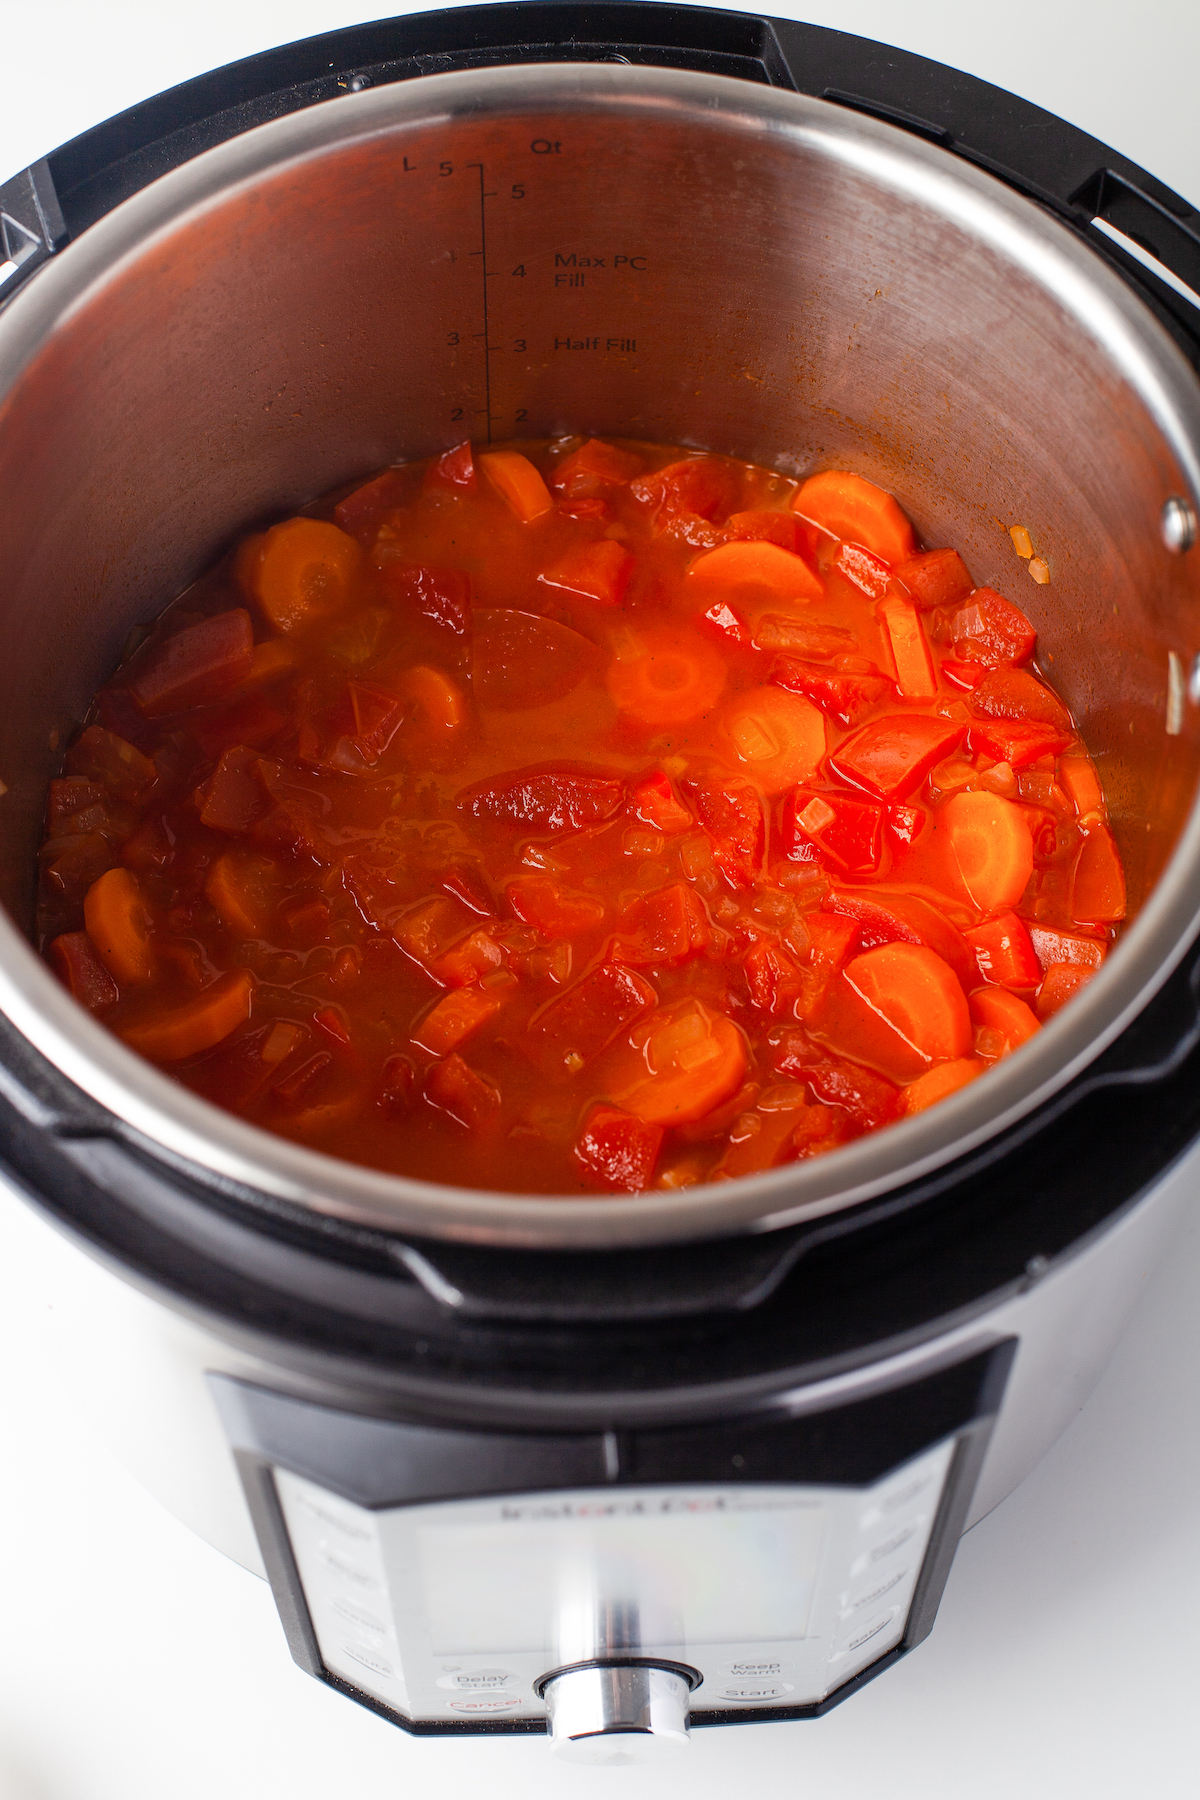 Cooked tomatoes and other ingredients in an Instant Pot.